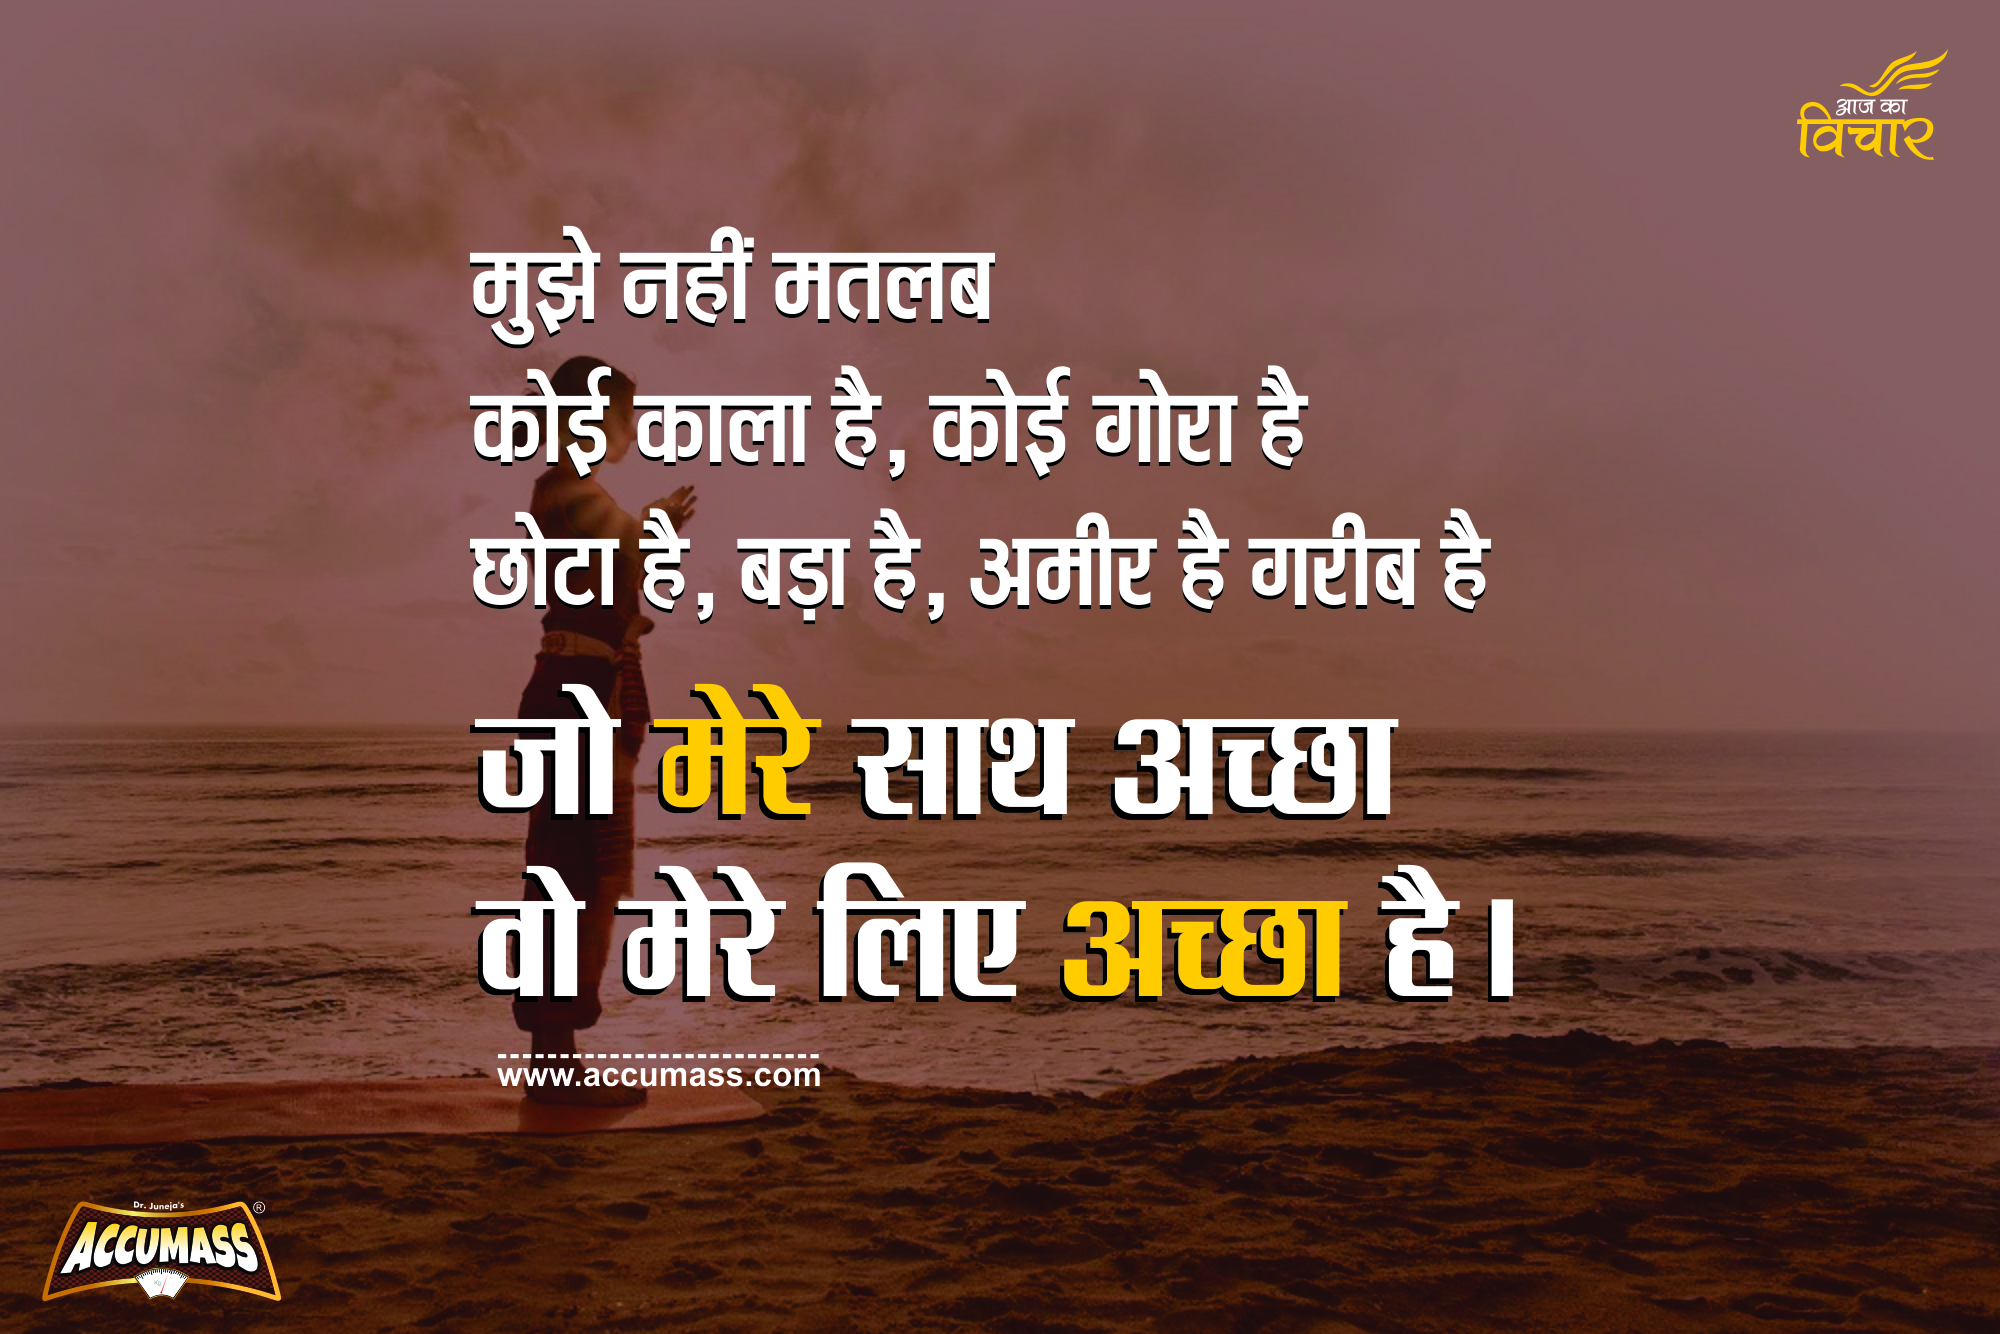 Motivational thoughts in Hindi